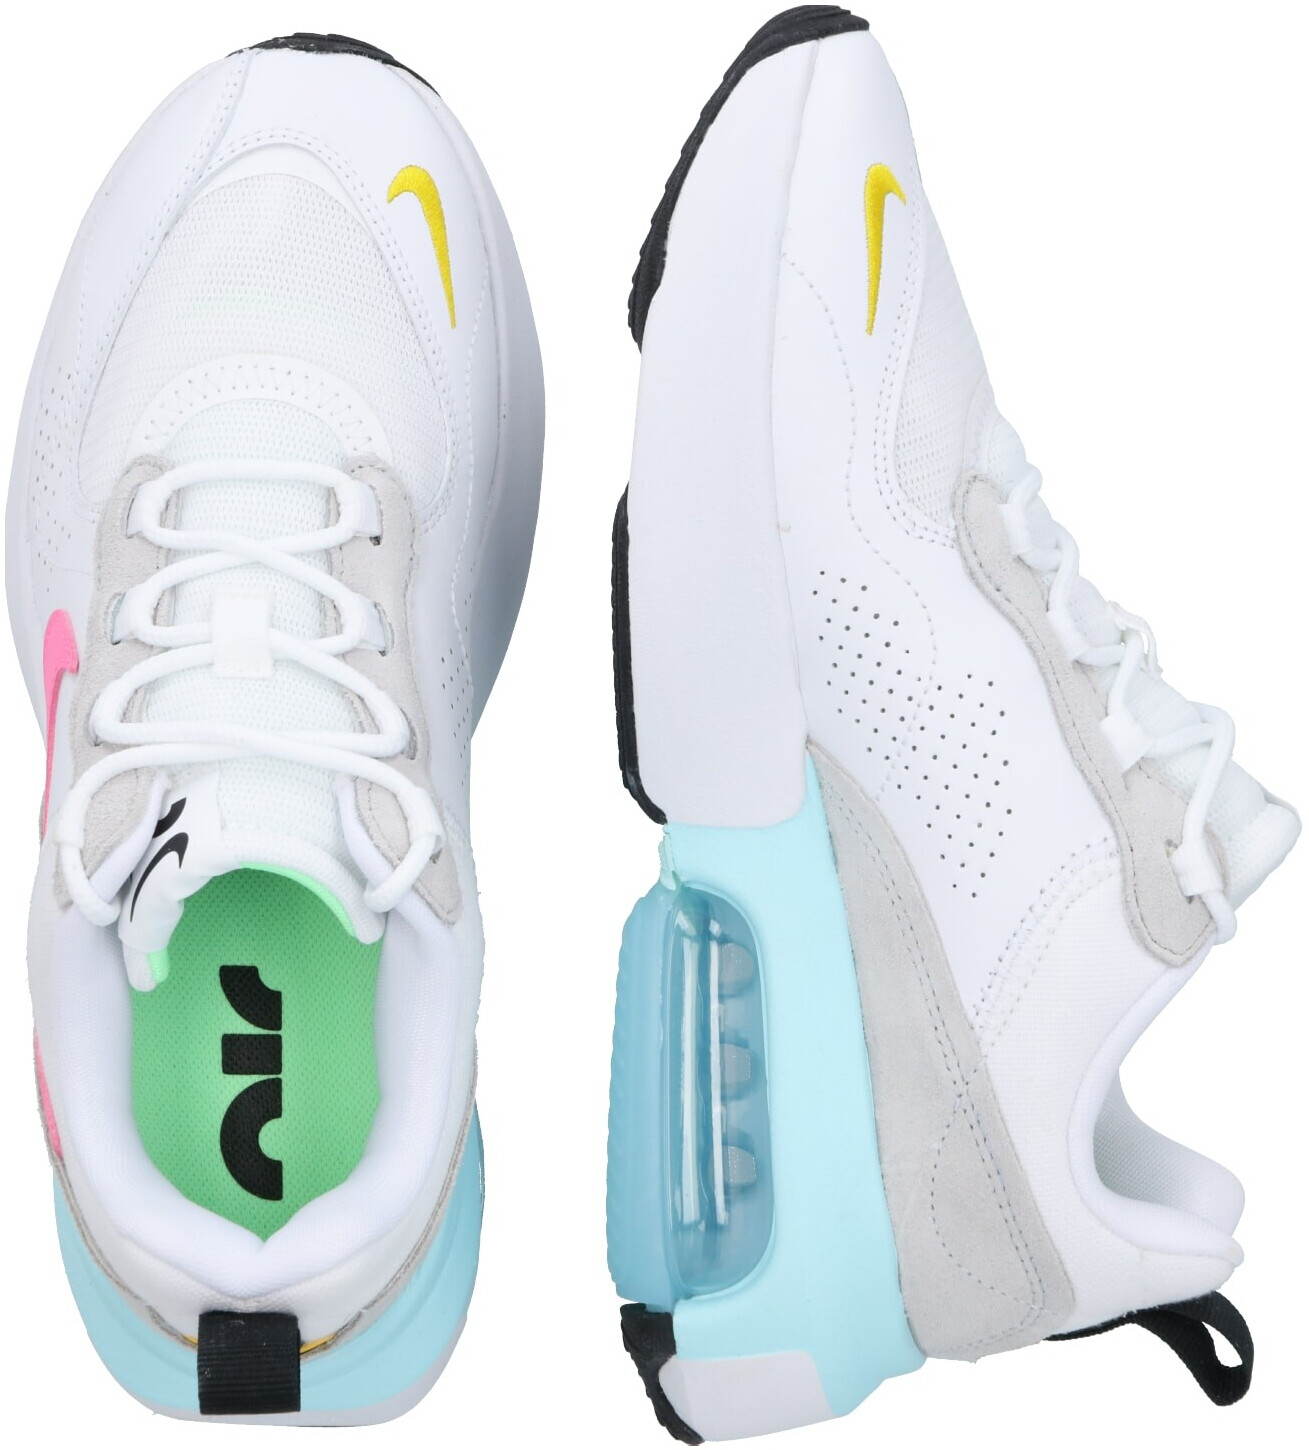 Buy Nike Air Max Verona white/pure platinum/glacier ice/pink glow from  £59.99 (Today) – Best Deals on